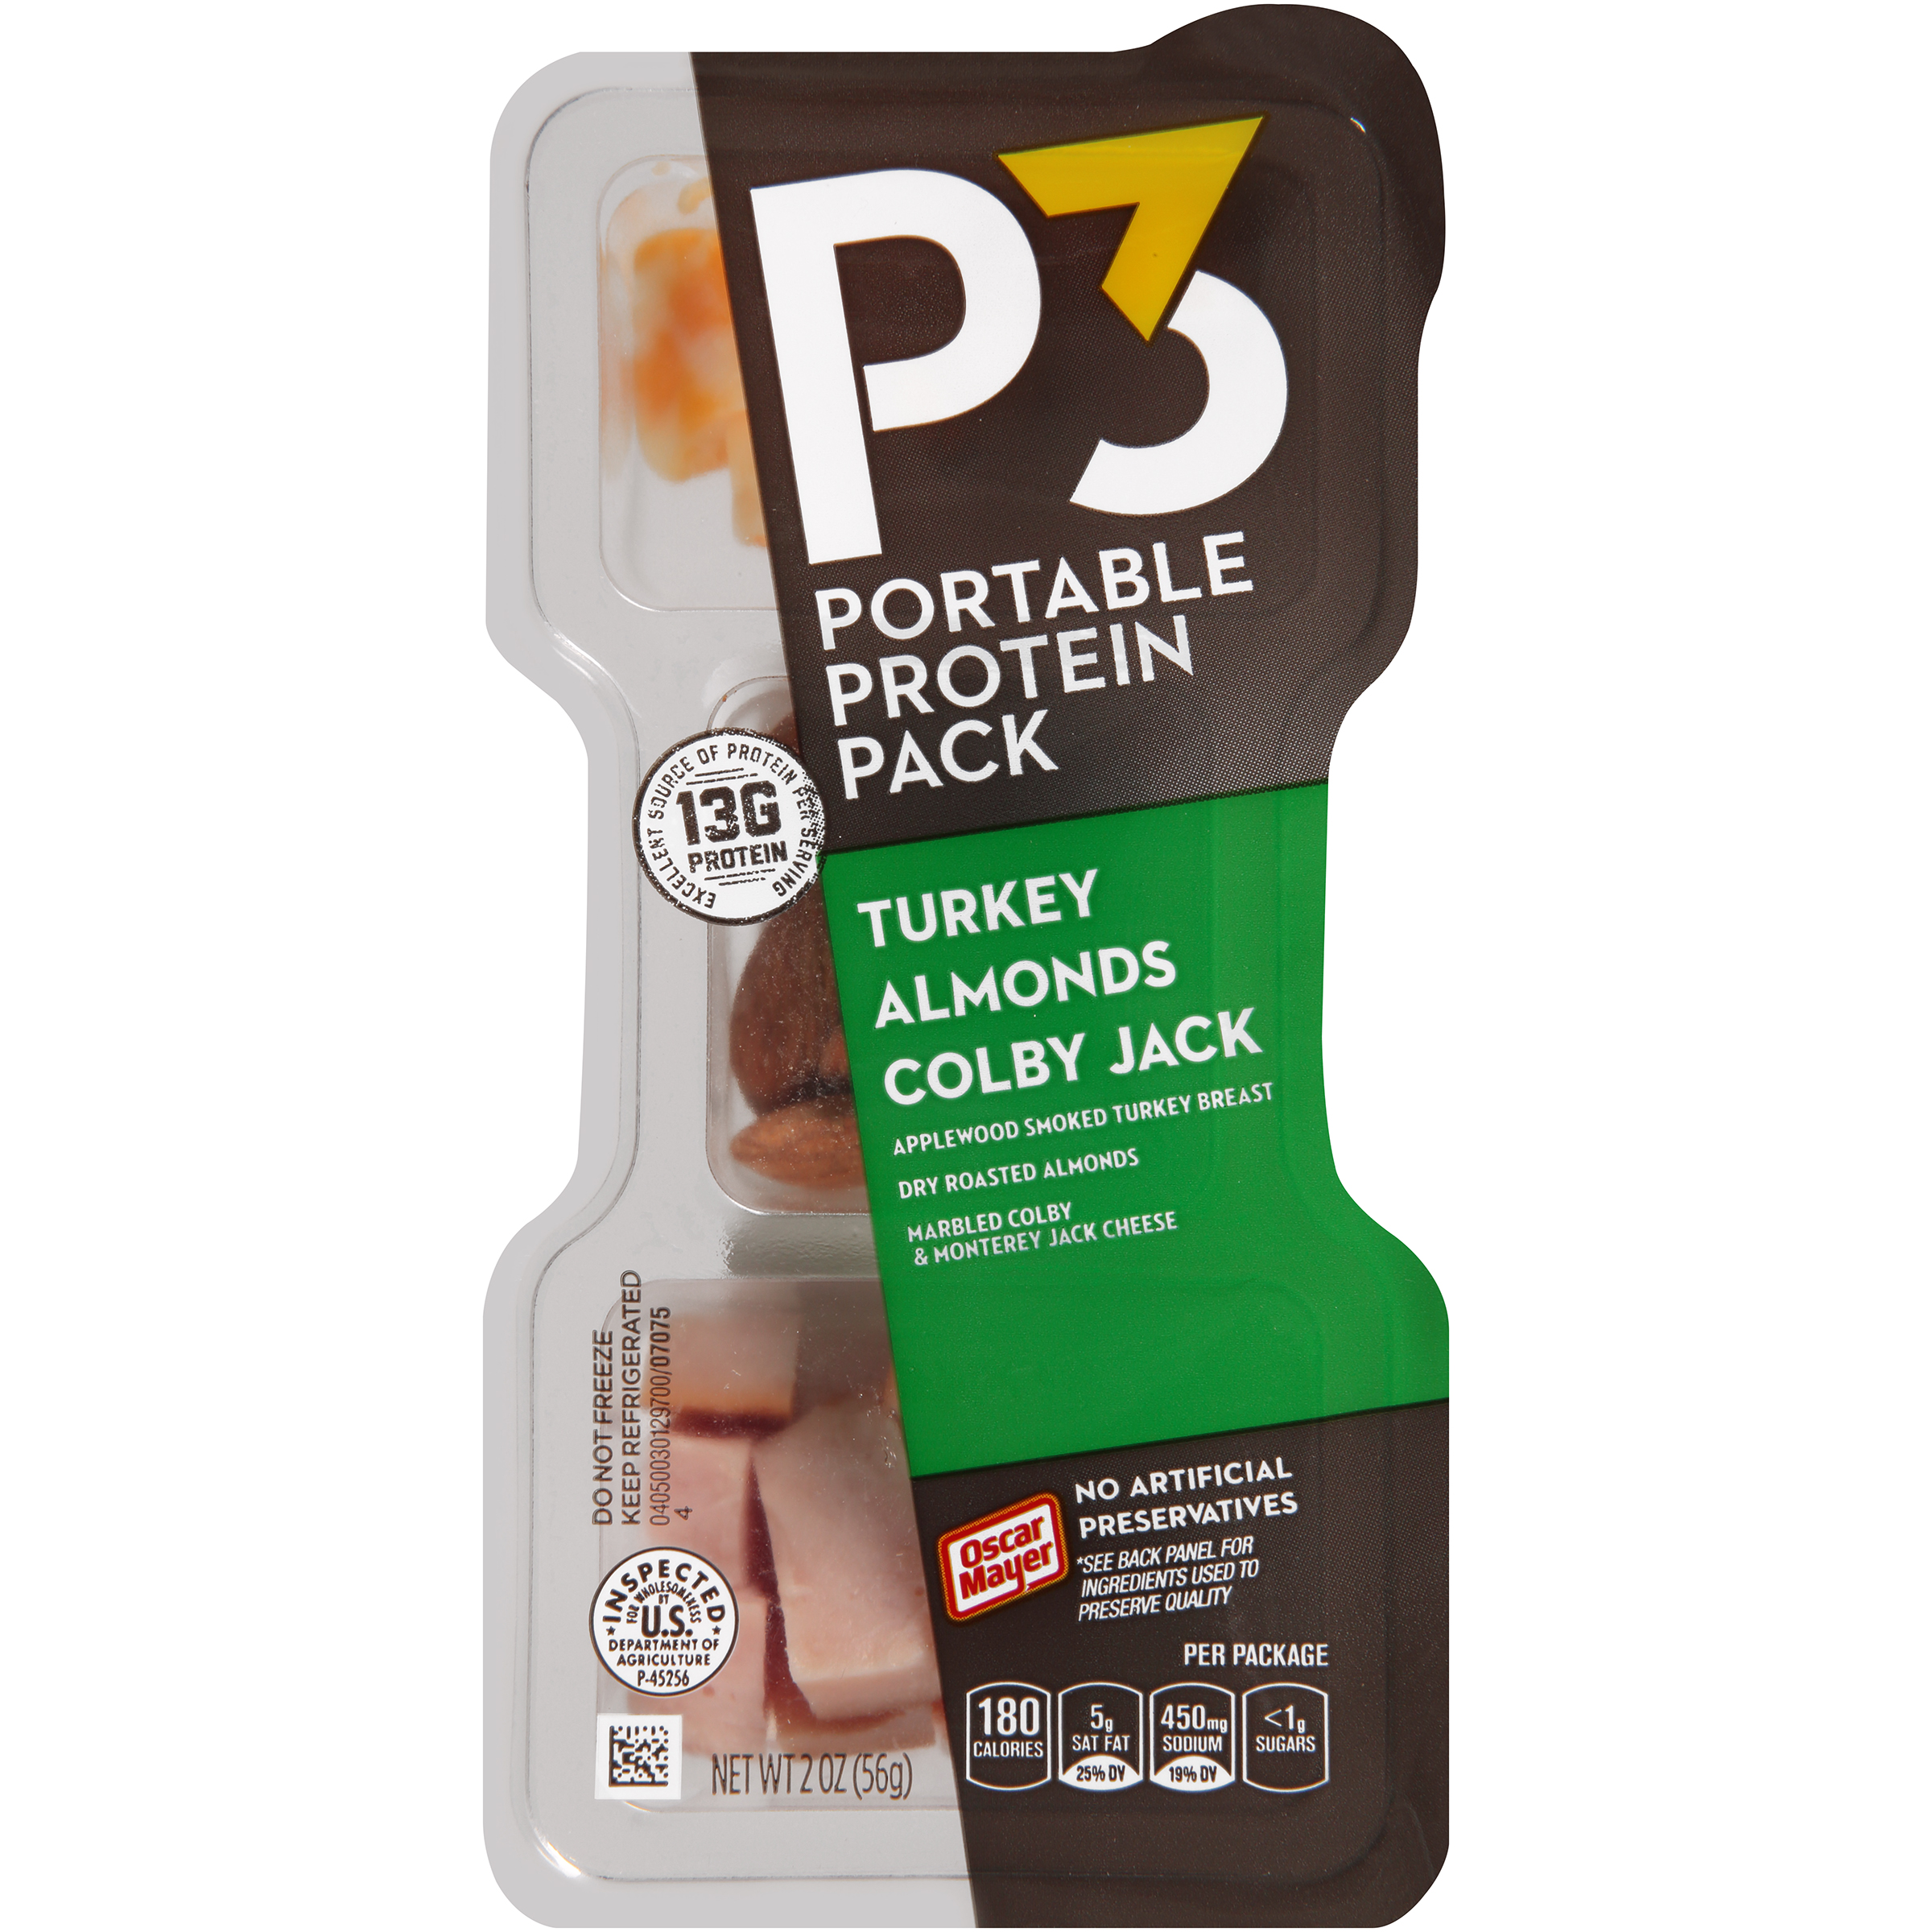 UPC 044700070758 product image for Turkey Breast/Colby & Monterey Jack/Almonds Portable Protein Pack | upcitemdb.com